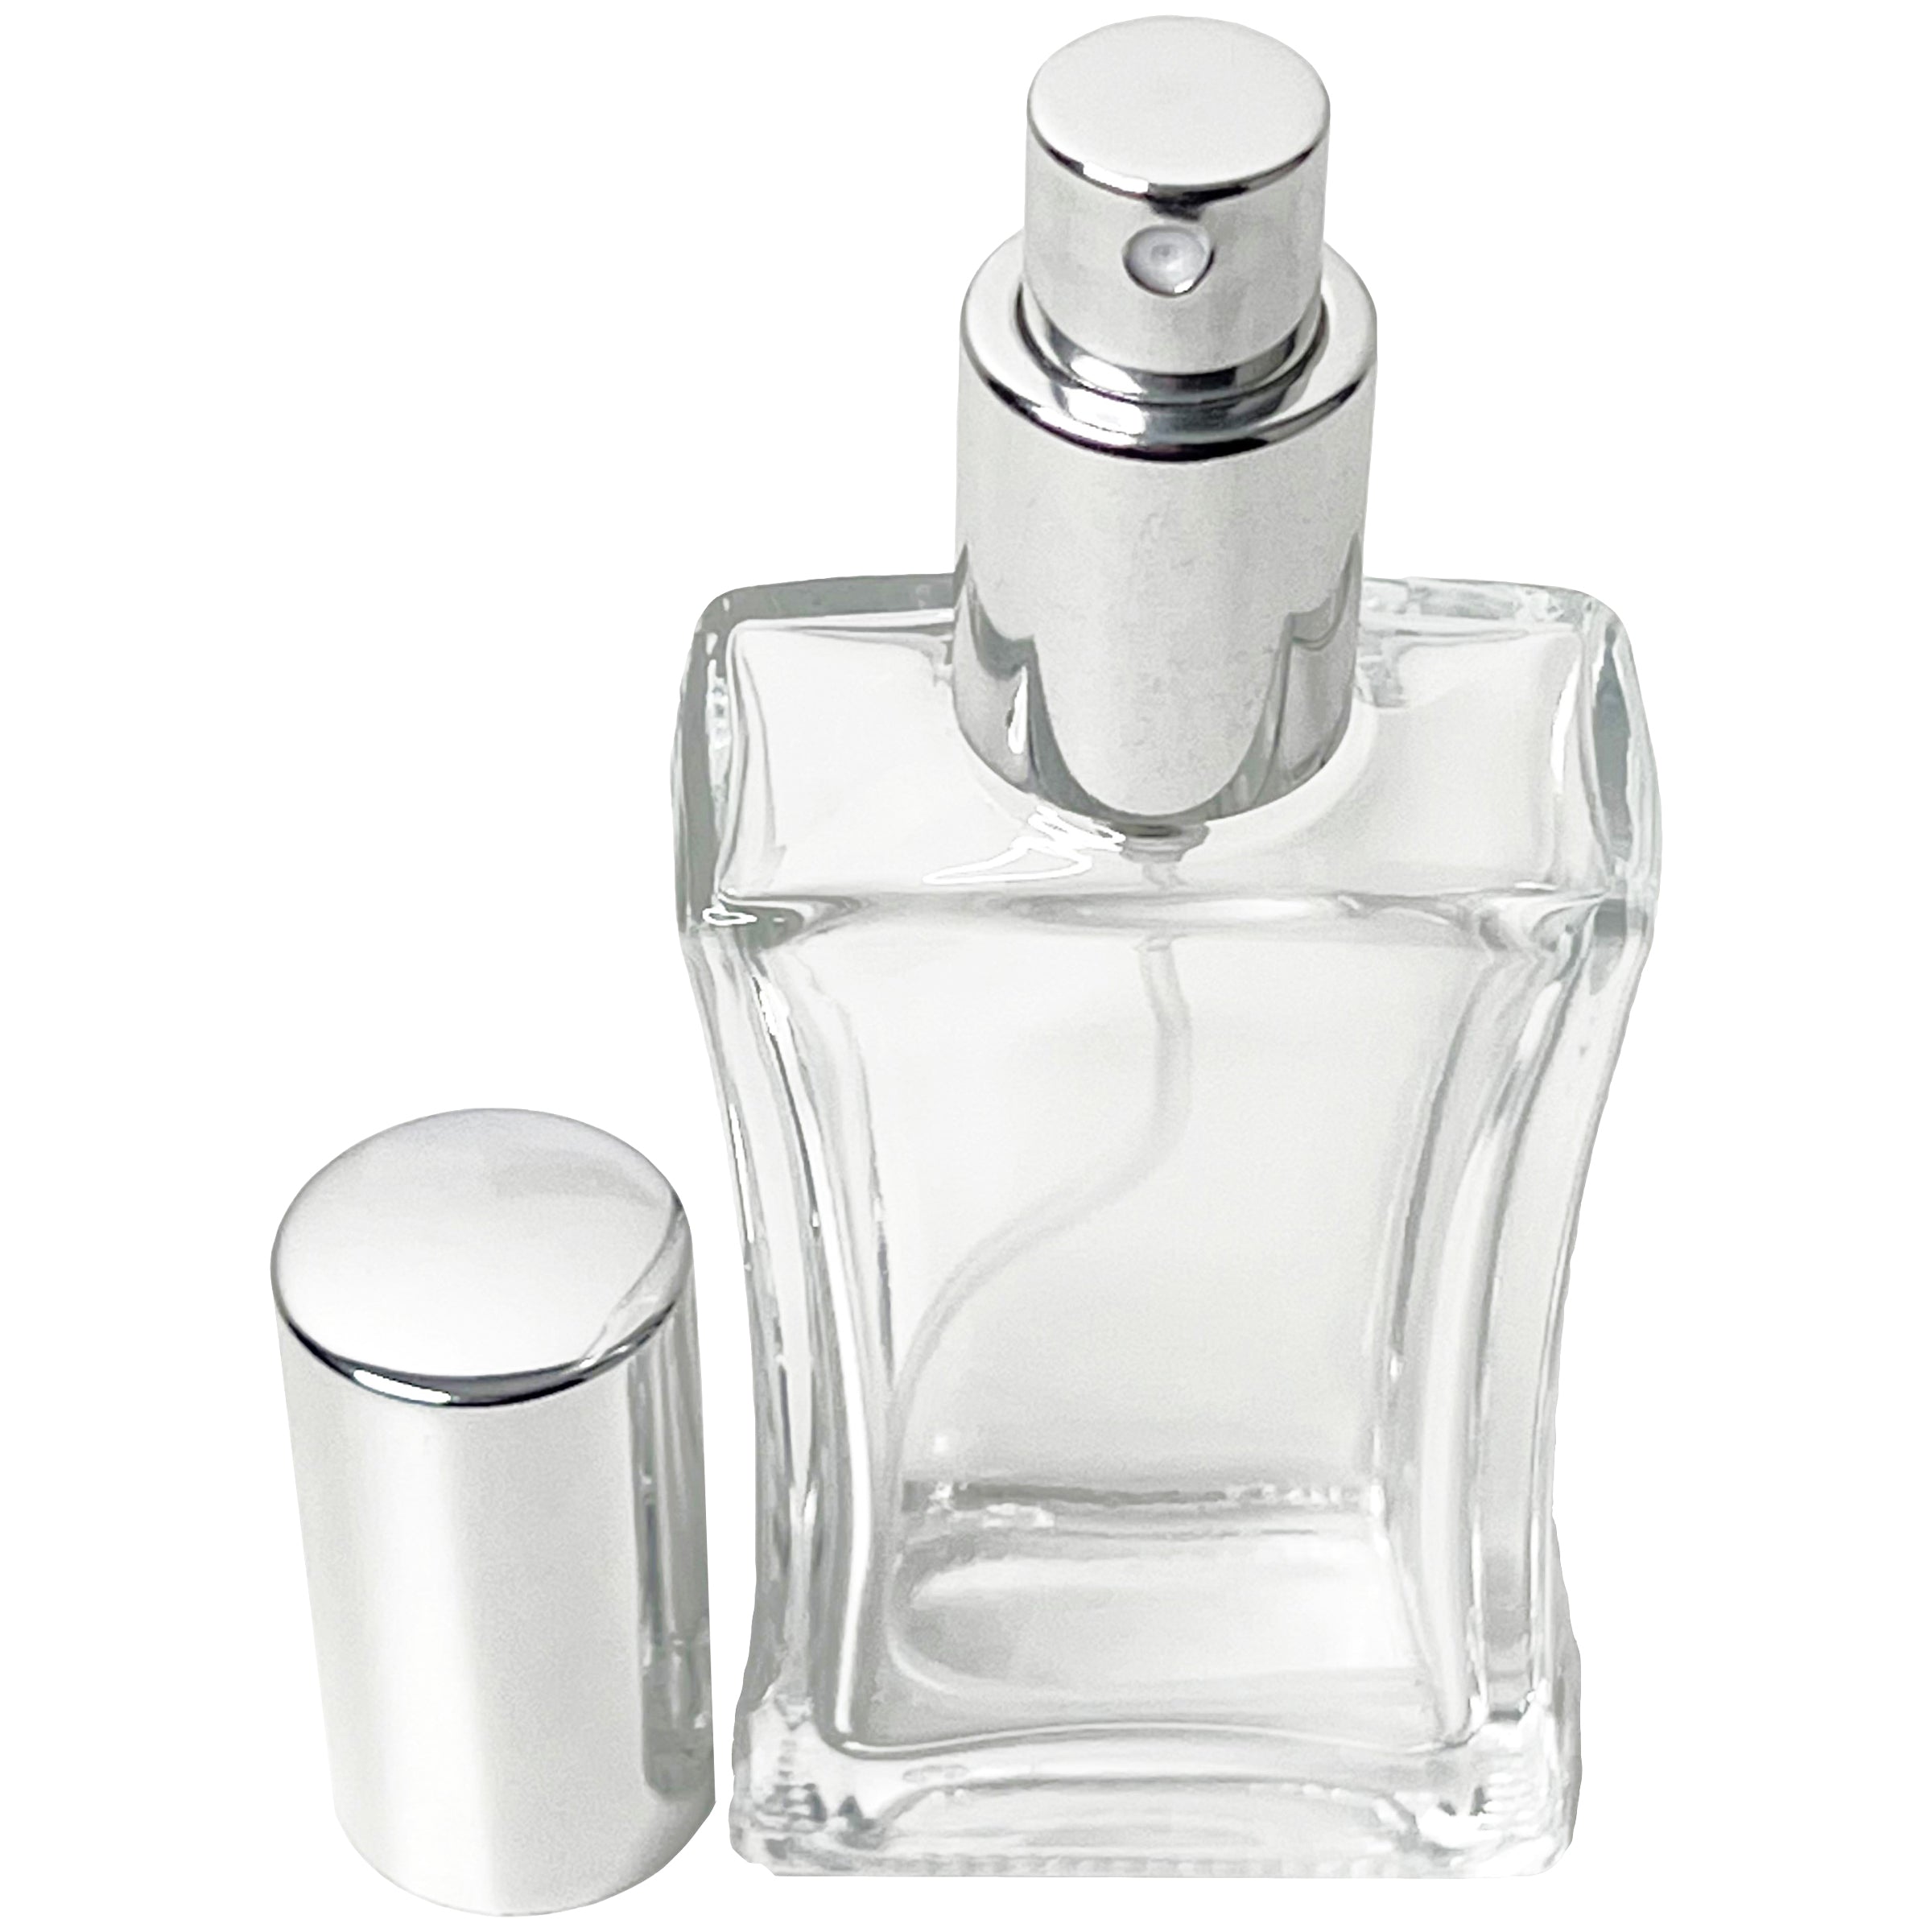 50ml 1.7oz Refillable Hourglass Empty Perfume Bottles Thick Glass Silver Atomizer